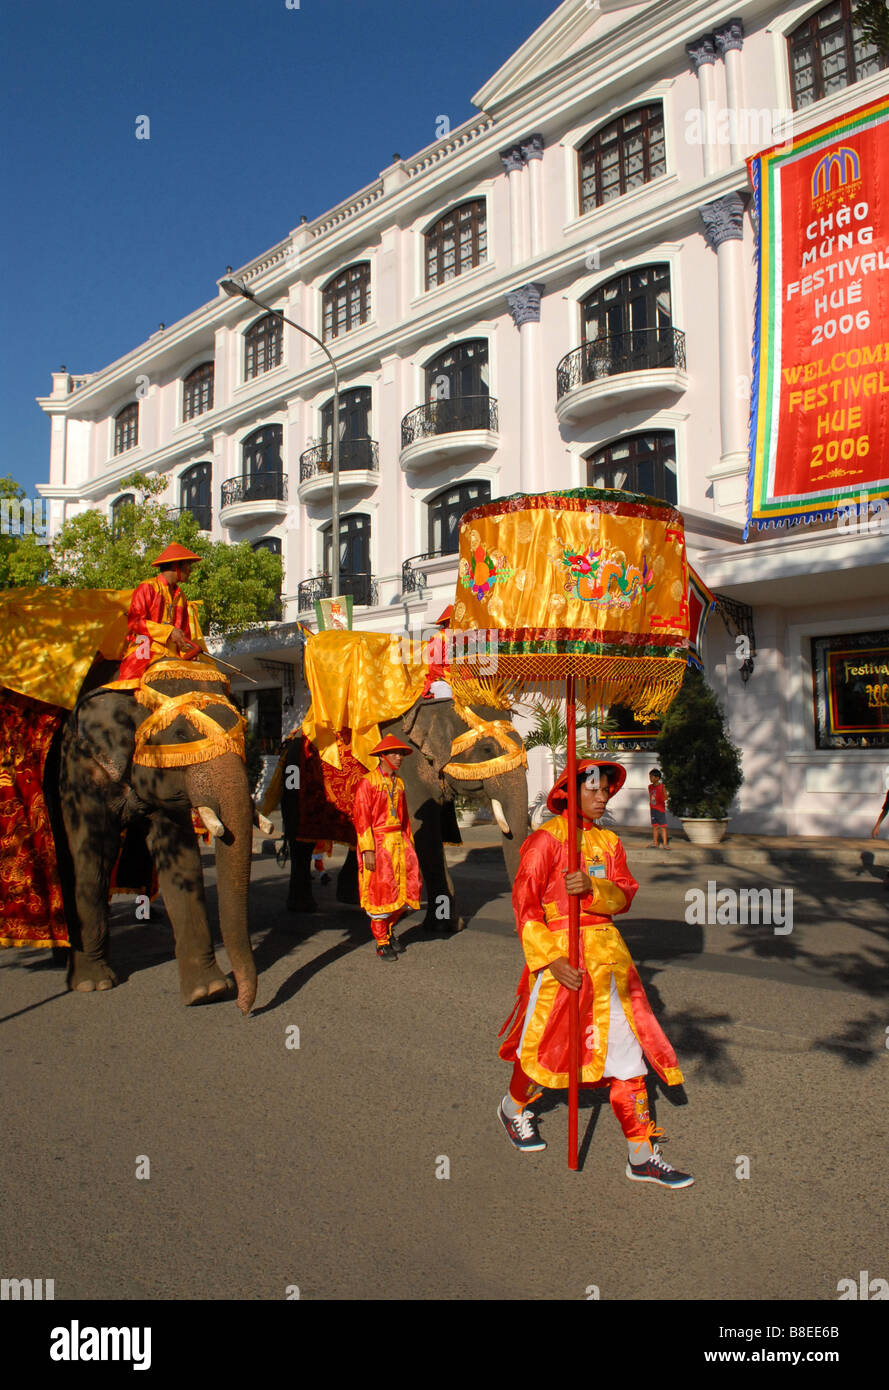 Imperial ceremony with elephants  in the city of Hue in front of Saigon Morin Hotel Stock Photo